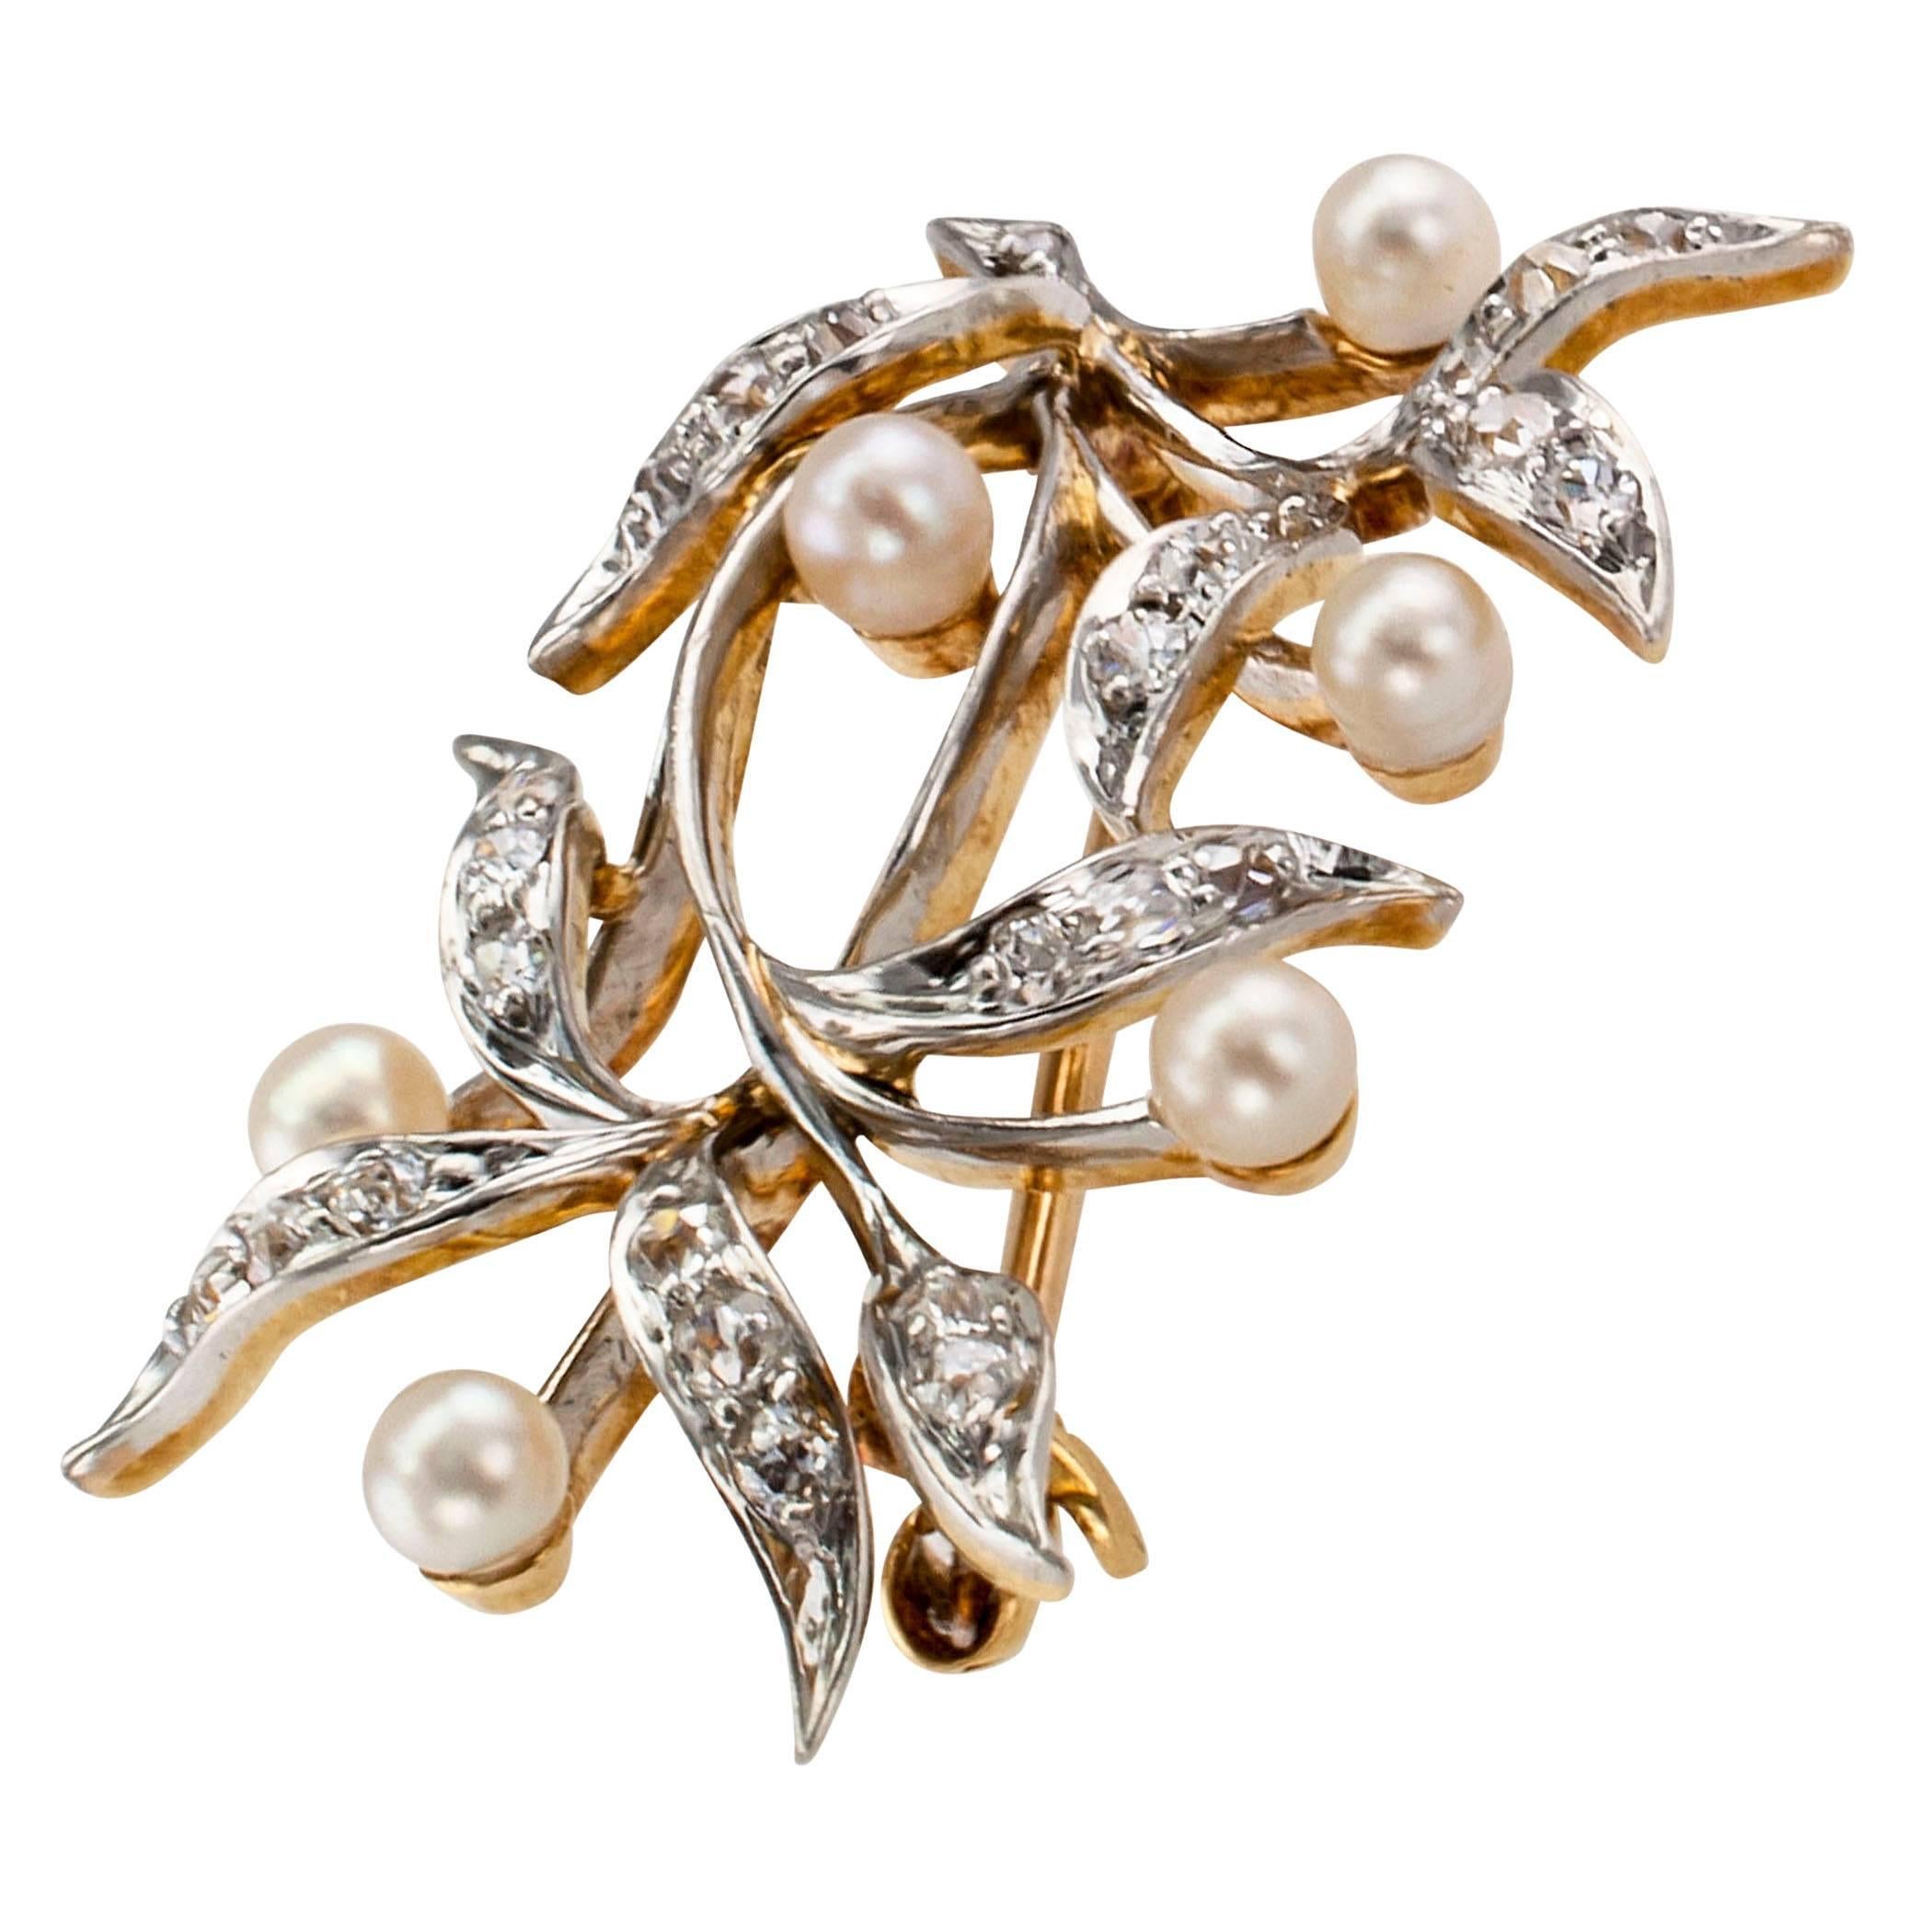 Edwardian 1910 pearl and diamond brooch mounted in gold and platinum. Designed as a platinum topped branch with diamond-set leaves between stems studded with round pearls, mounted in 18-karat yellow gold, the diamonds totaling approximately 0.50